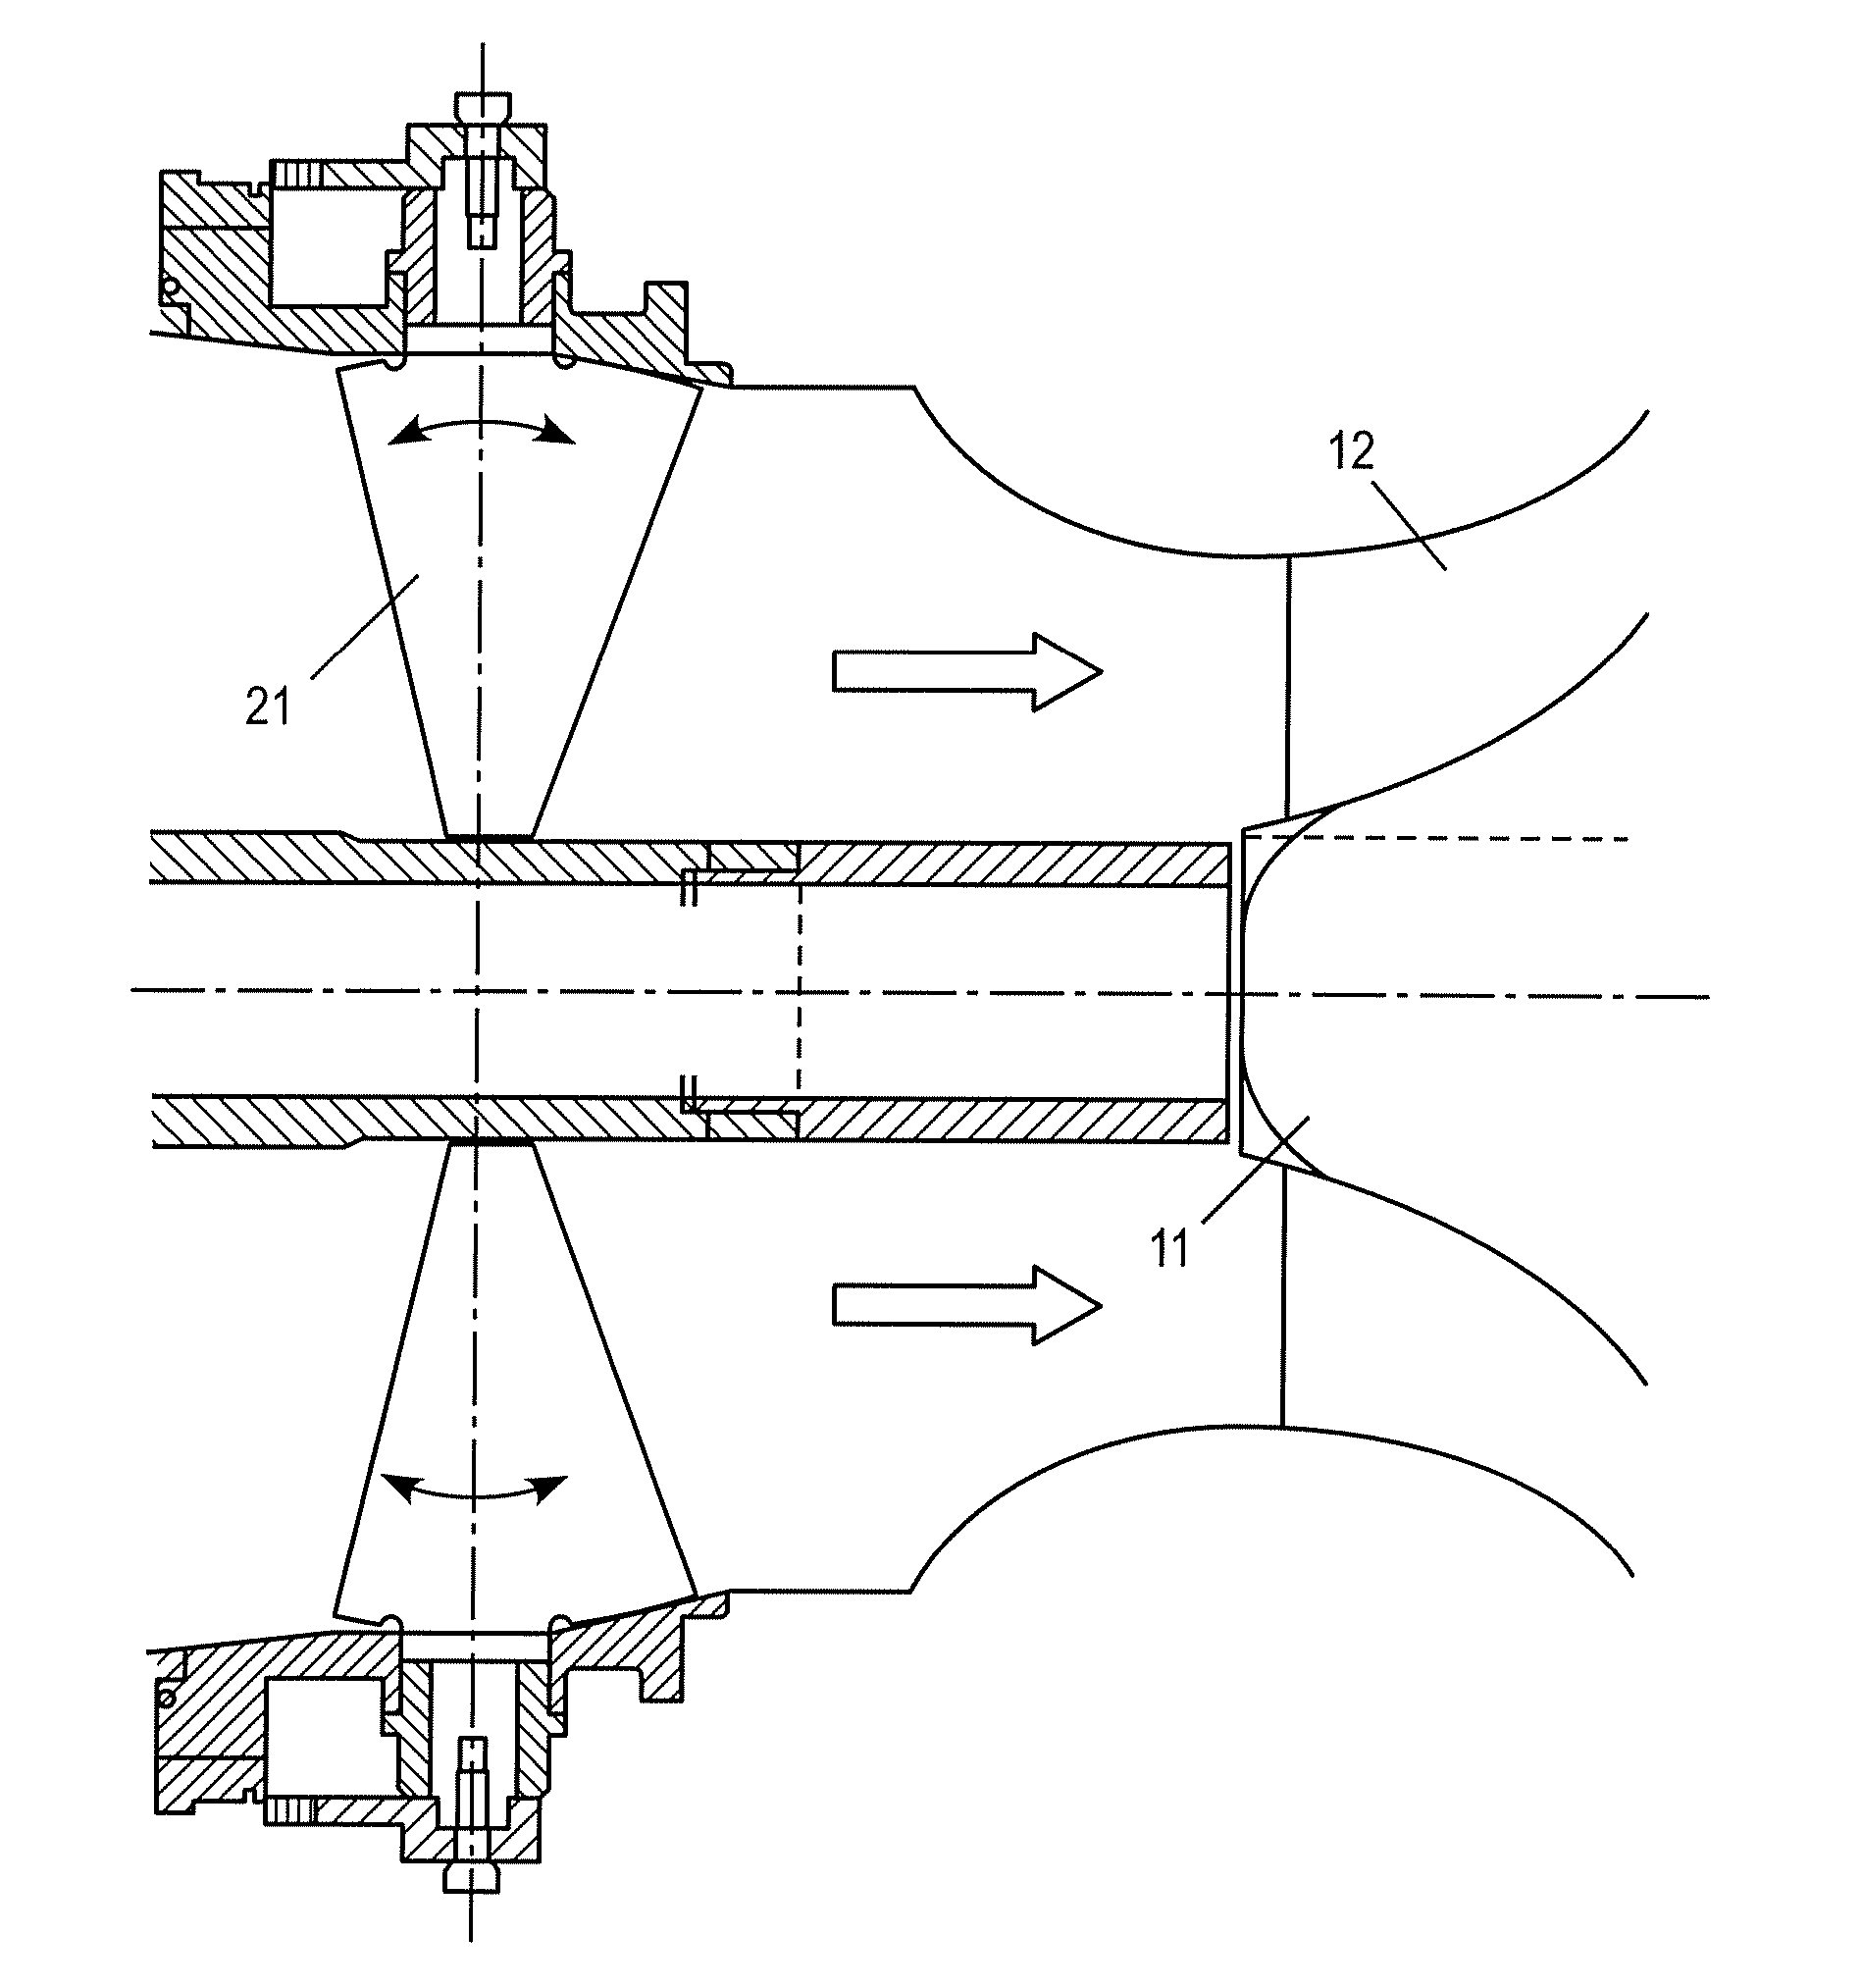 Supercharging control for an internal combustion engine